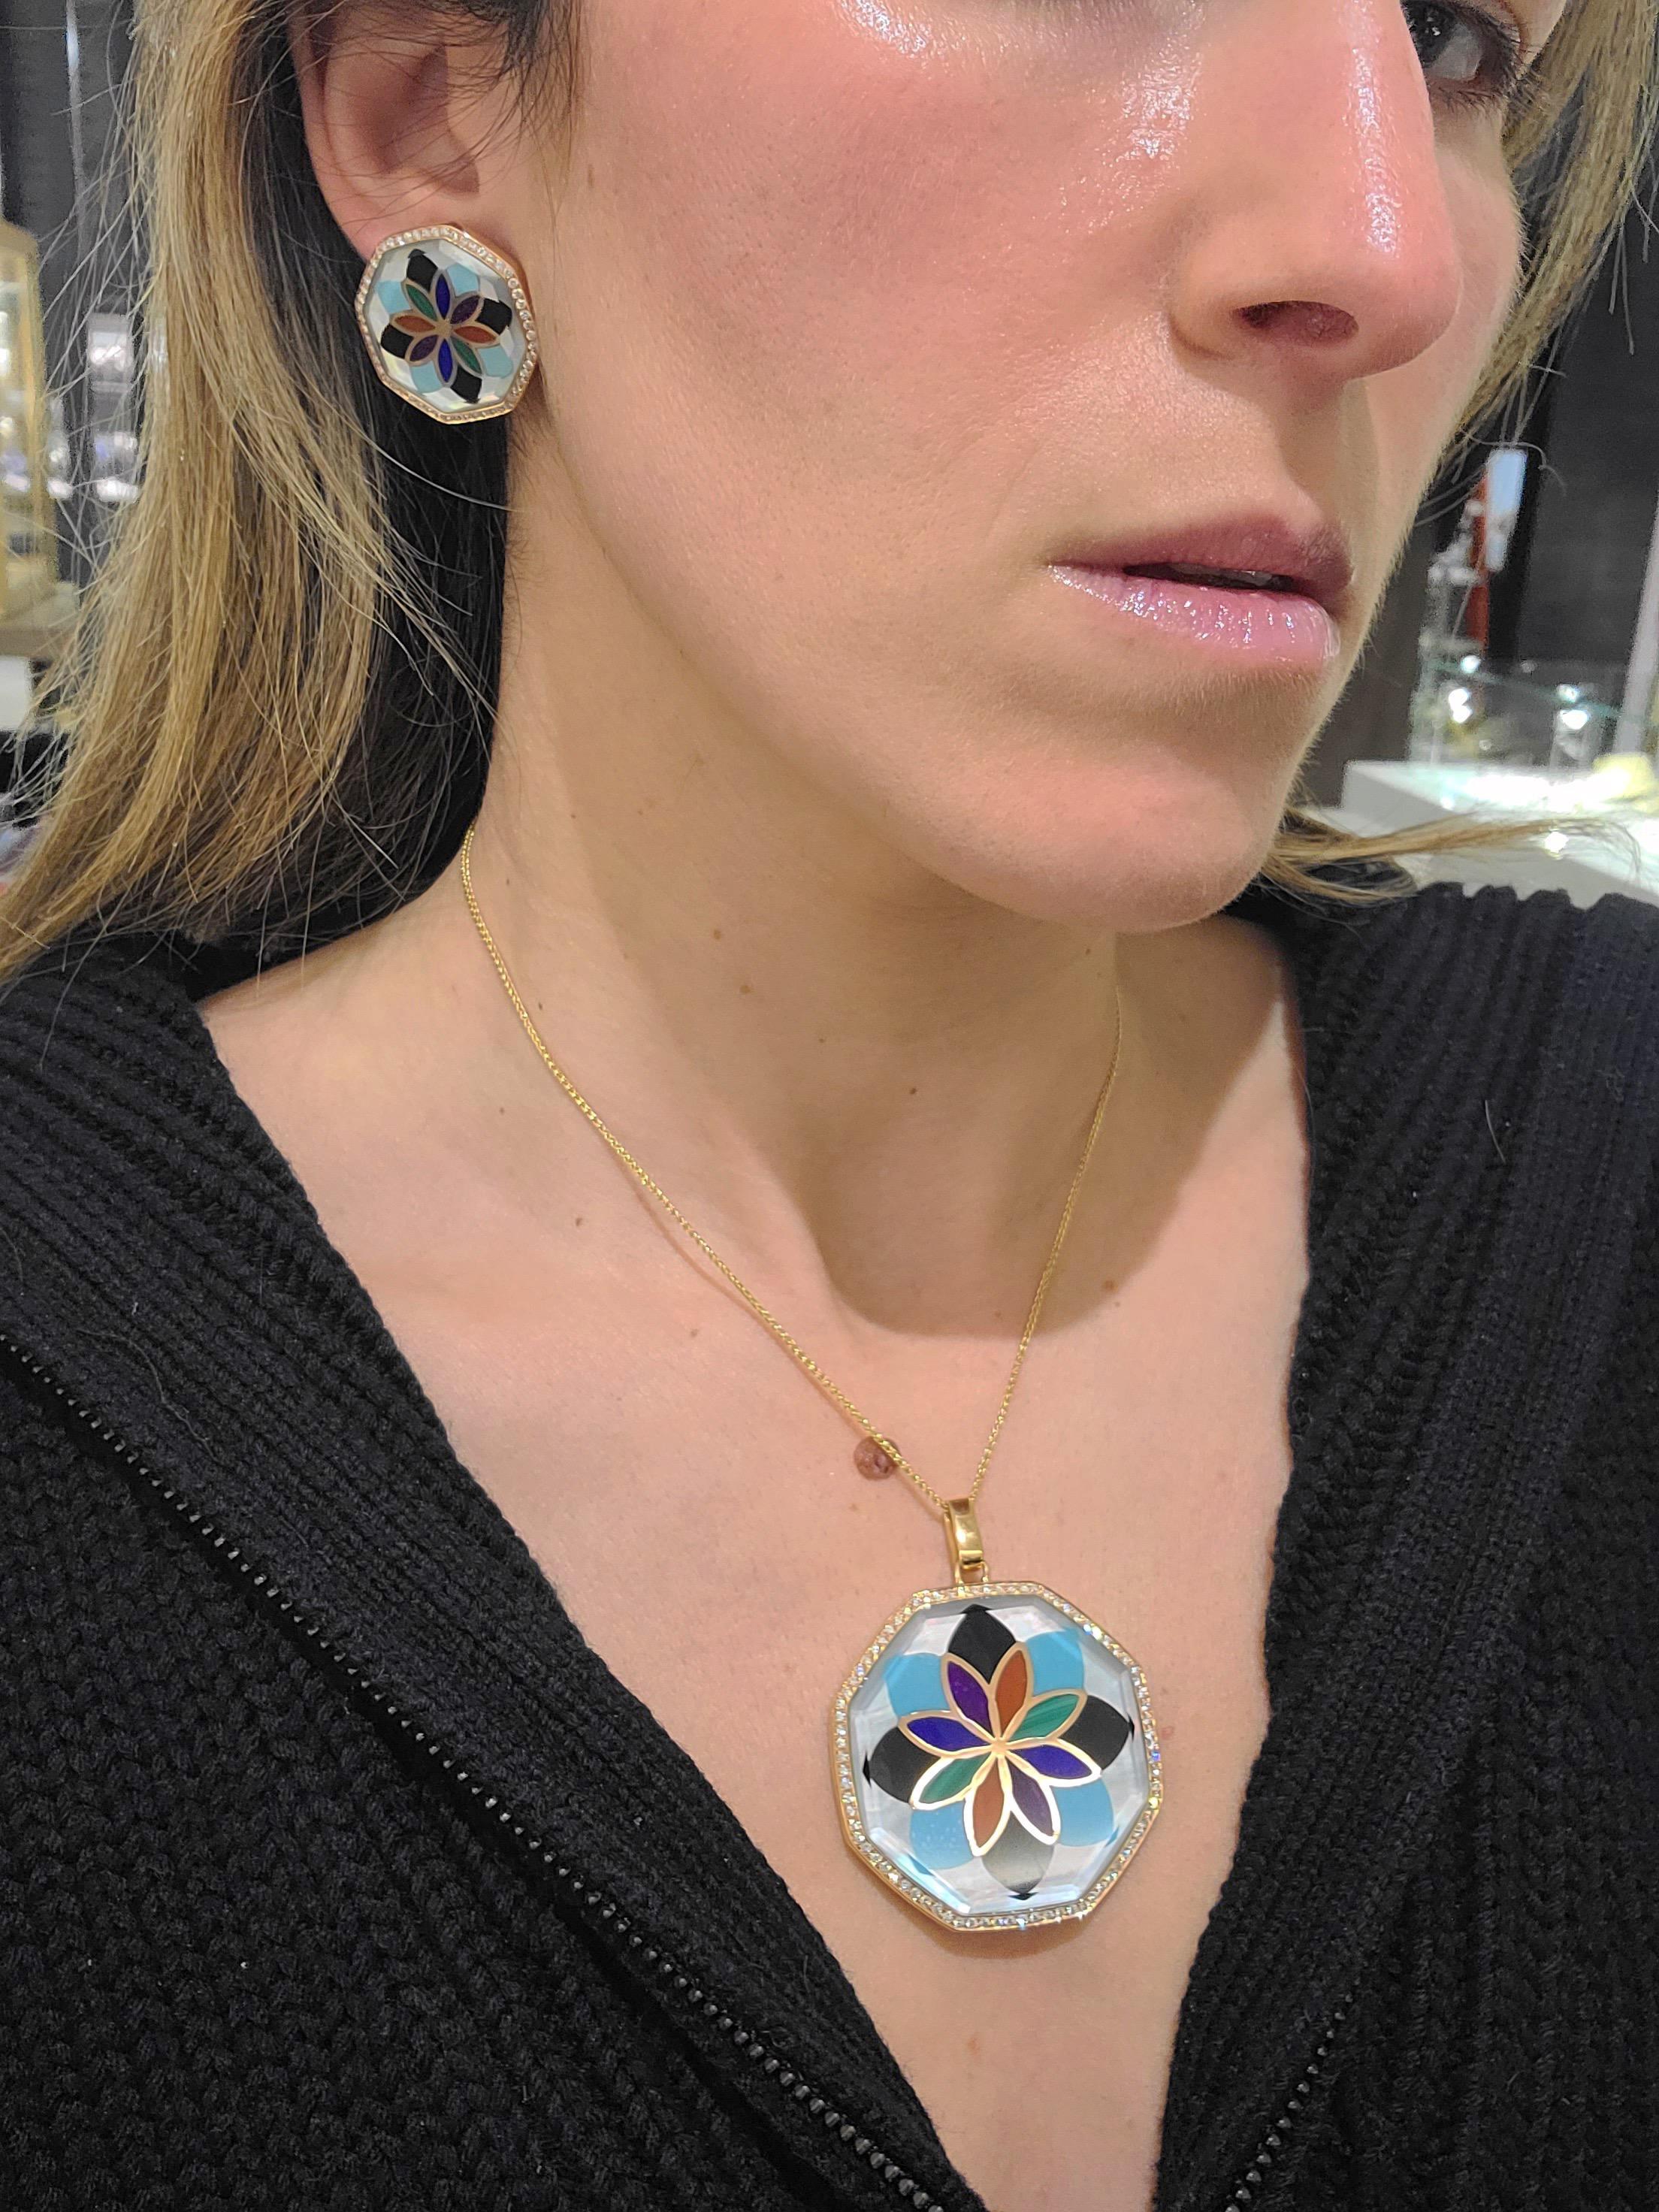 Designed by AschGrossbardt this impressive medallion features inlaid turquoise, onyx, coral, malachite, lapis lazuli and white mother of pearl in a mosaic flower pattern. A beveled rock crystal lays on top of the fine inlaid work creating a